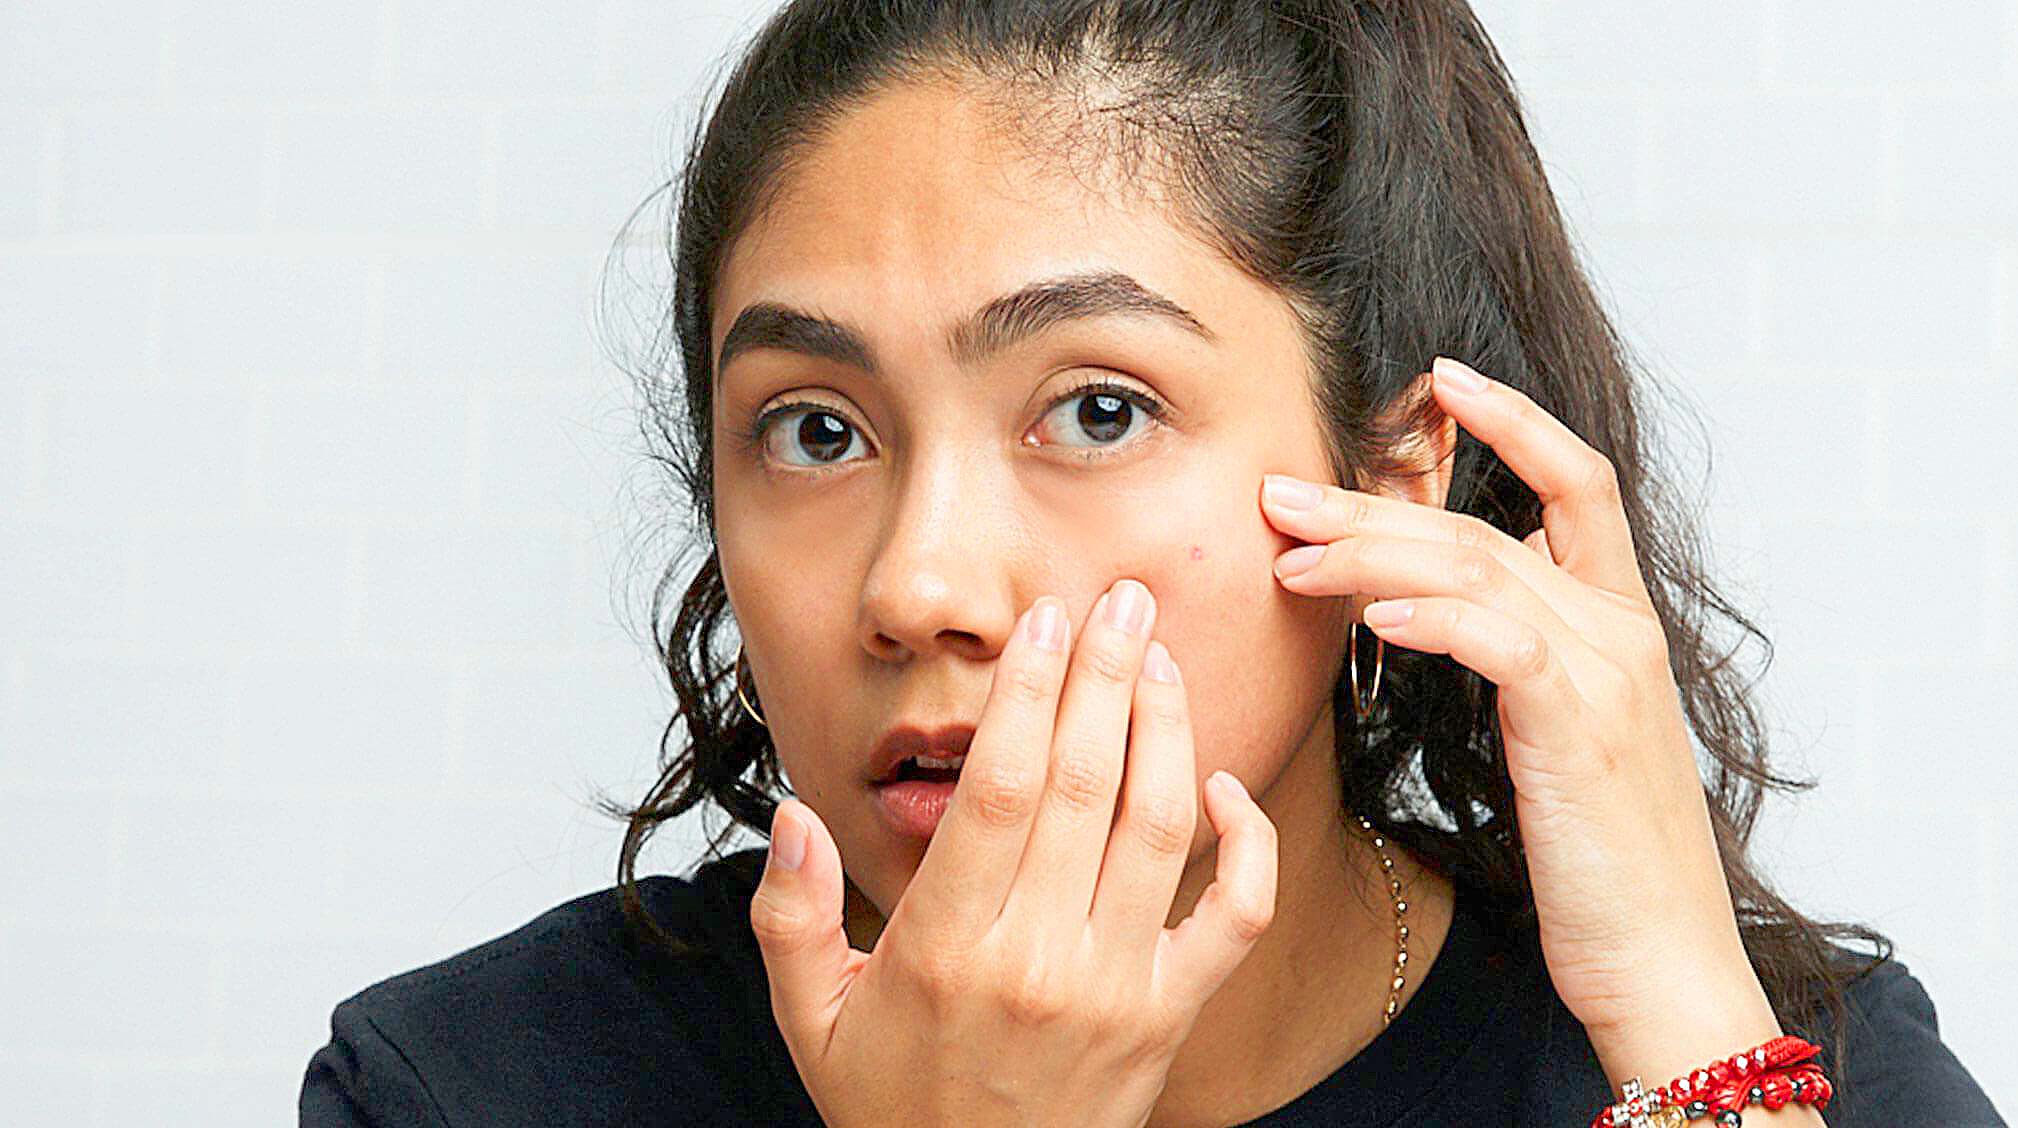 Girl analyzing pimple on face in front of a mirror